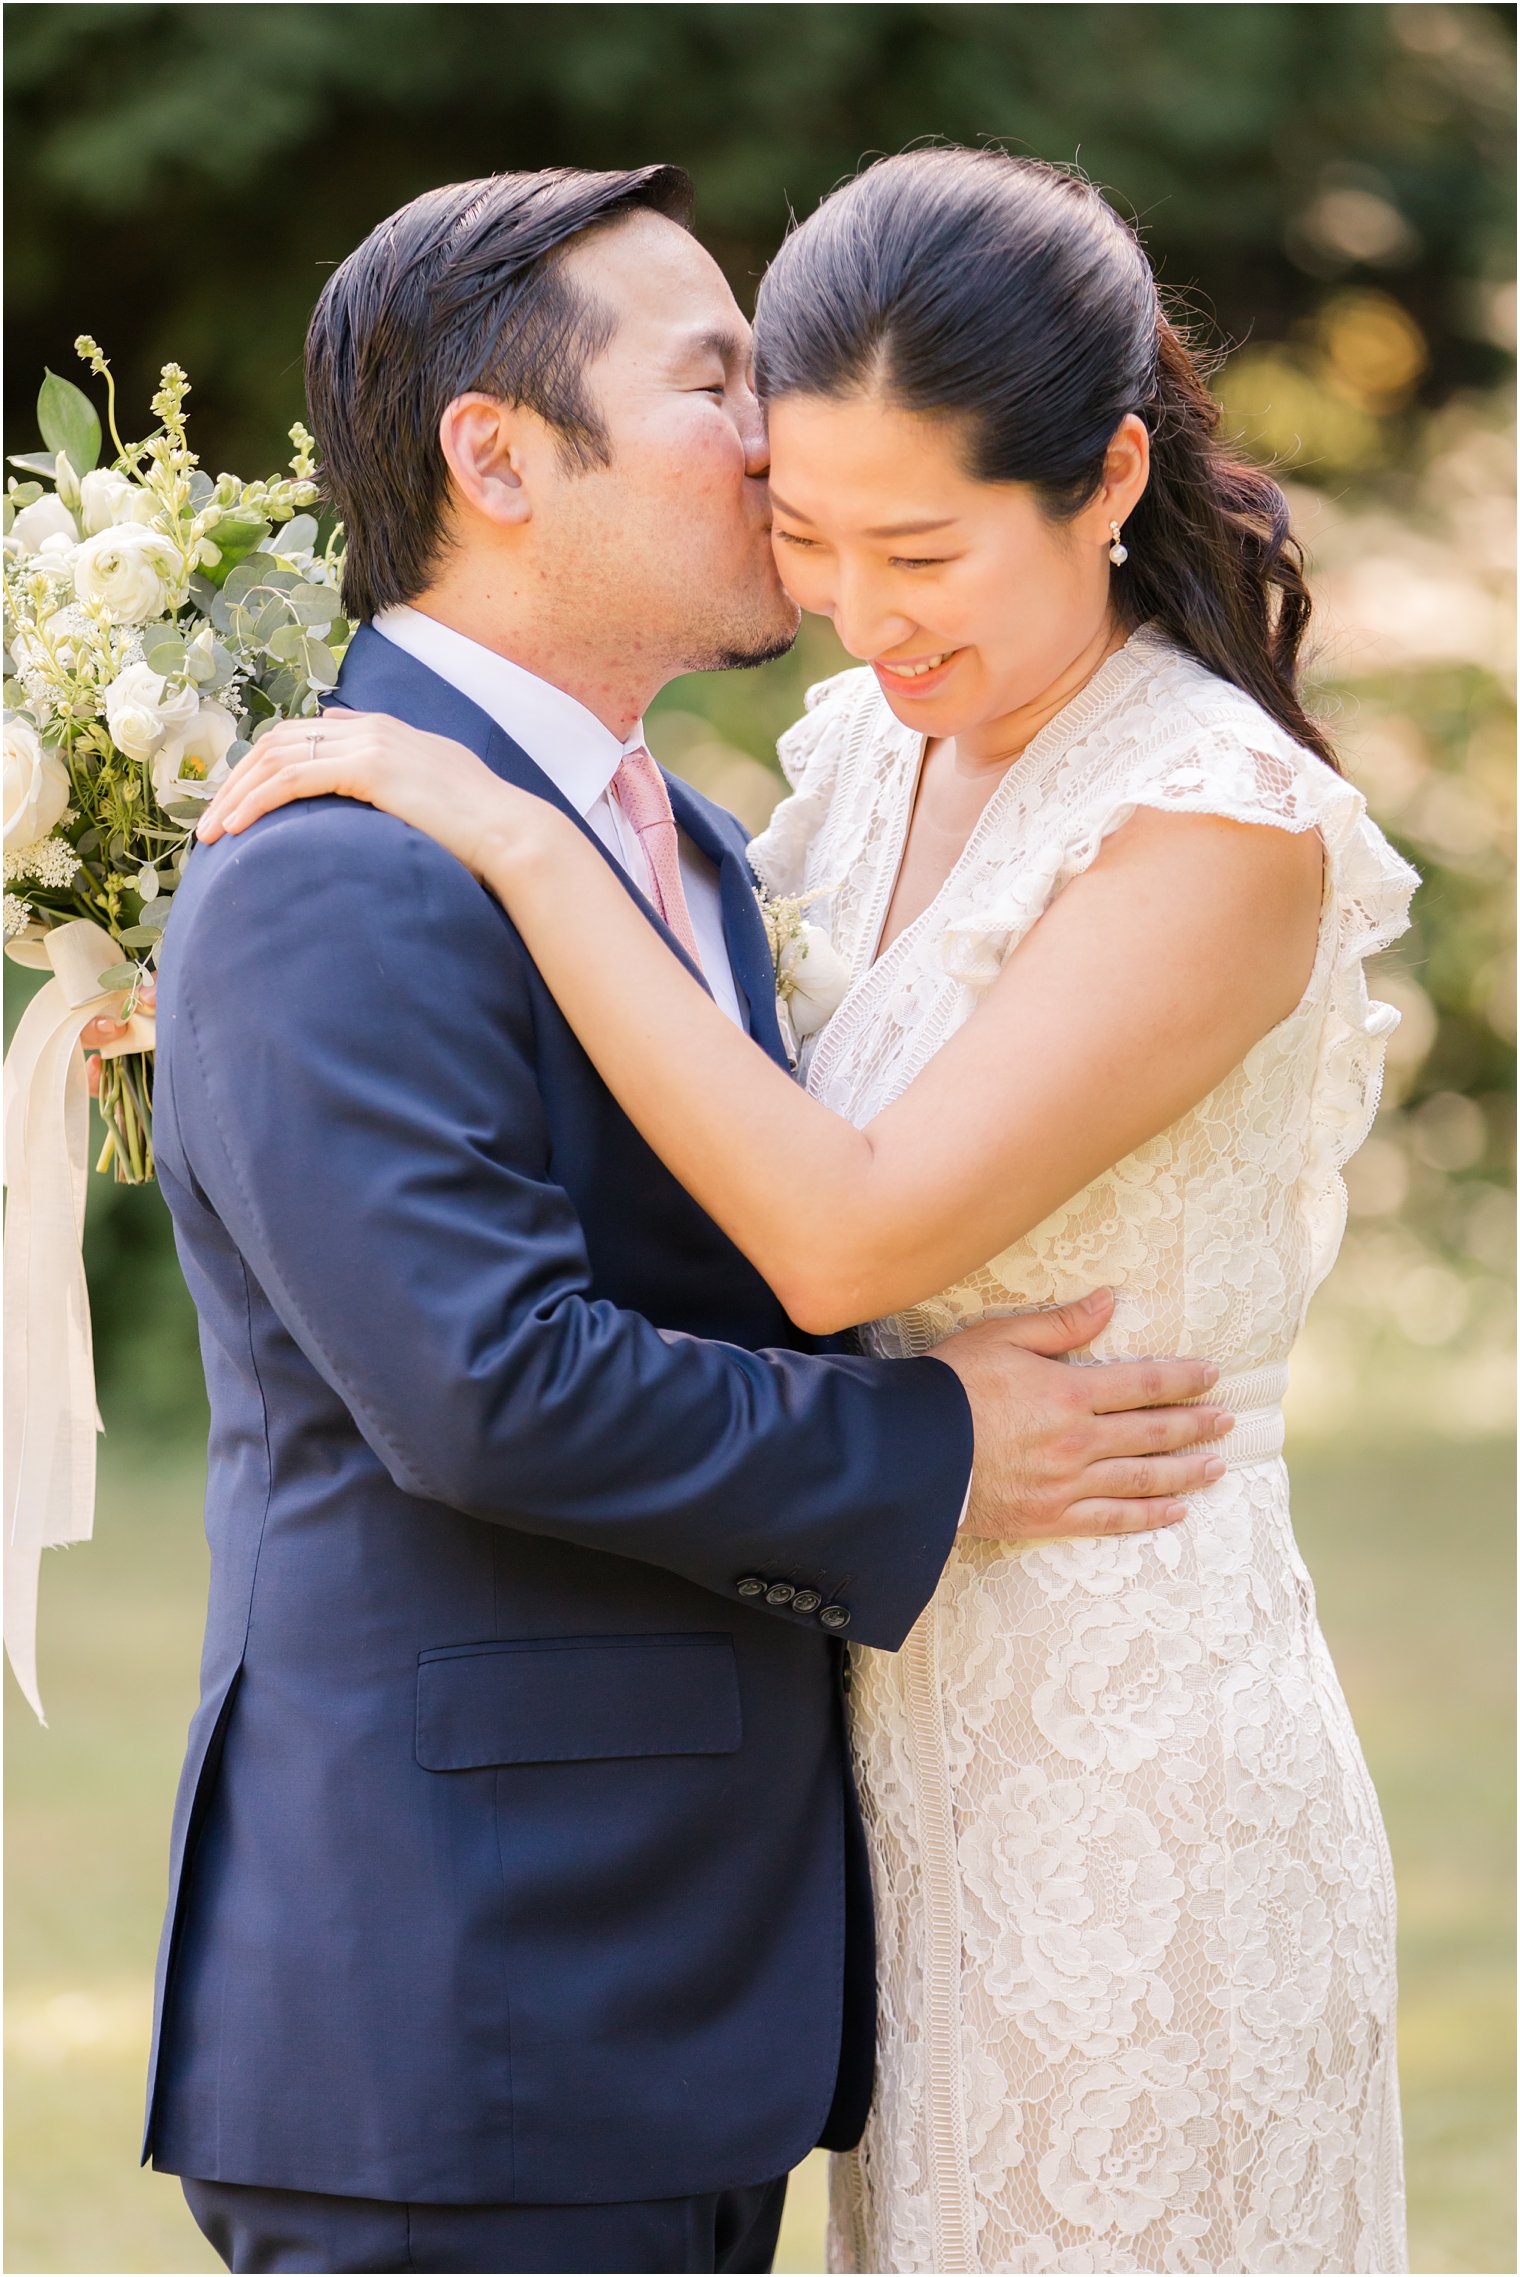 Candid moment between bride and groom | NJ Intimate Wedding with a Gorgeous Arch by Idalia Photography